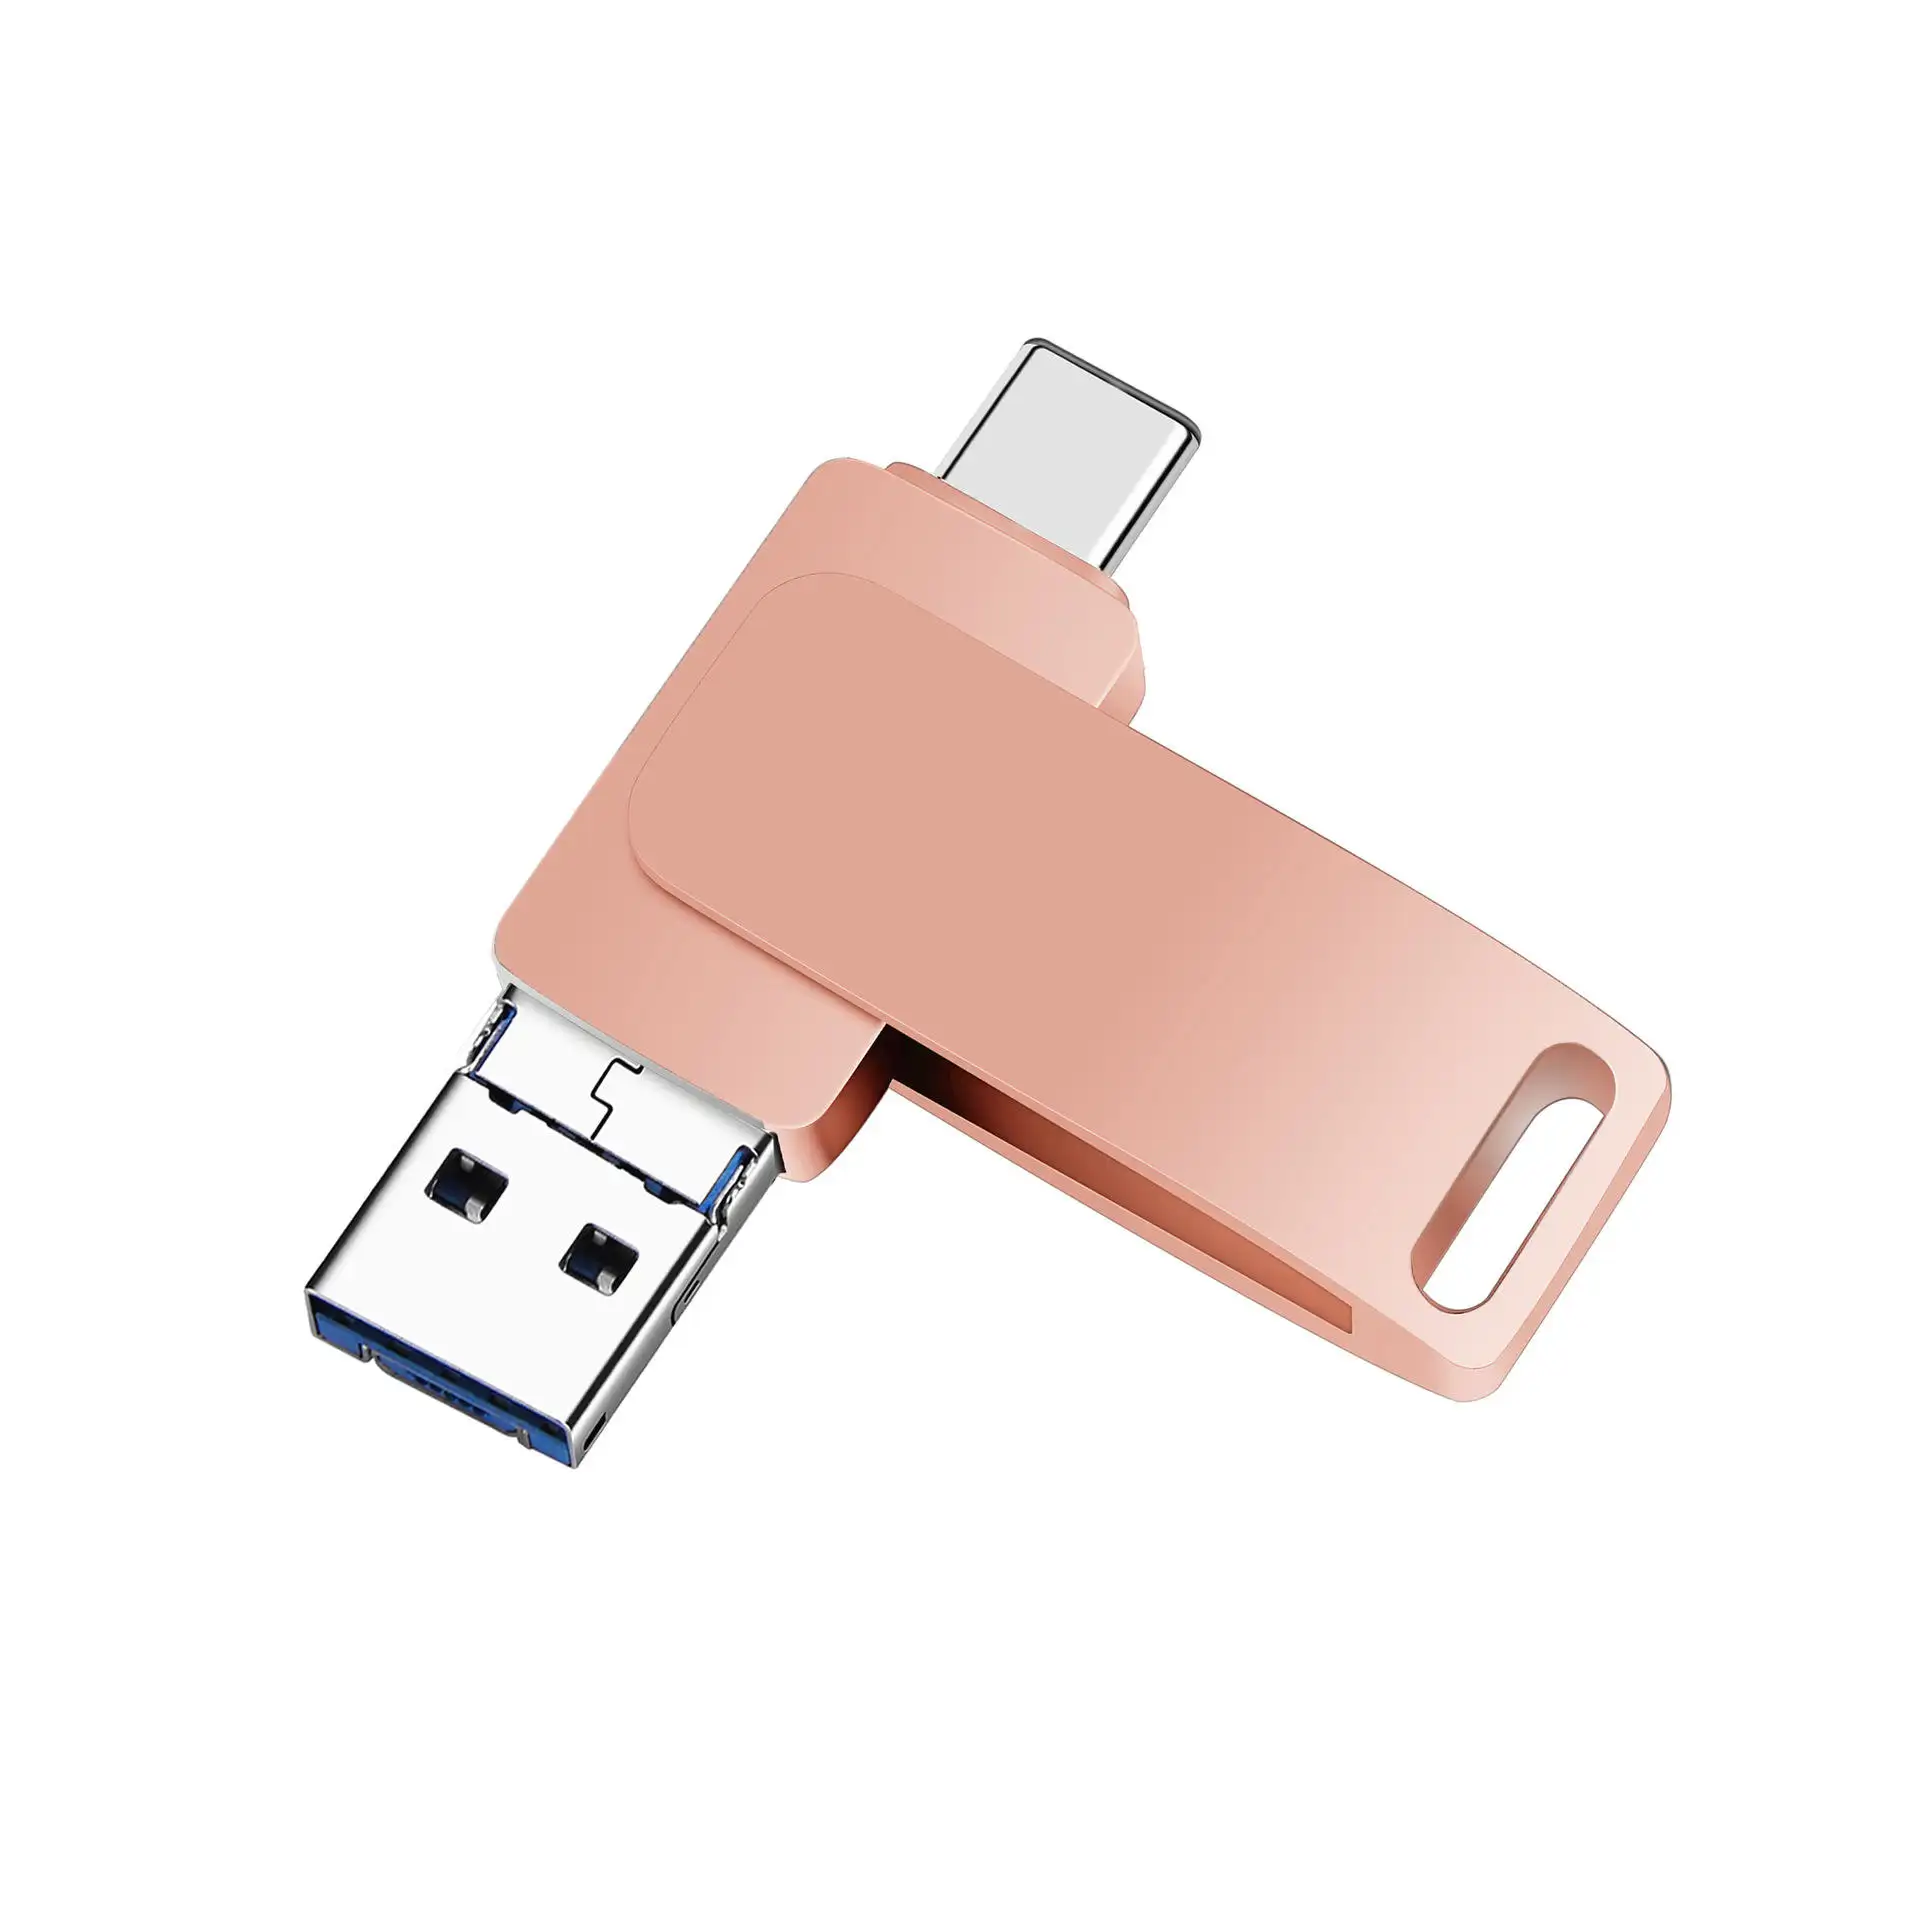 New OTG USB 3.0 3.1 Flash Drive For phone USB Android Lightning 3 In 1 Pen Drive For Type C External Storage Devices